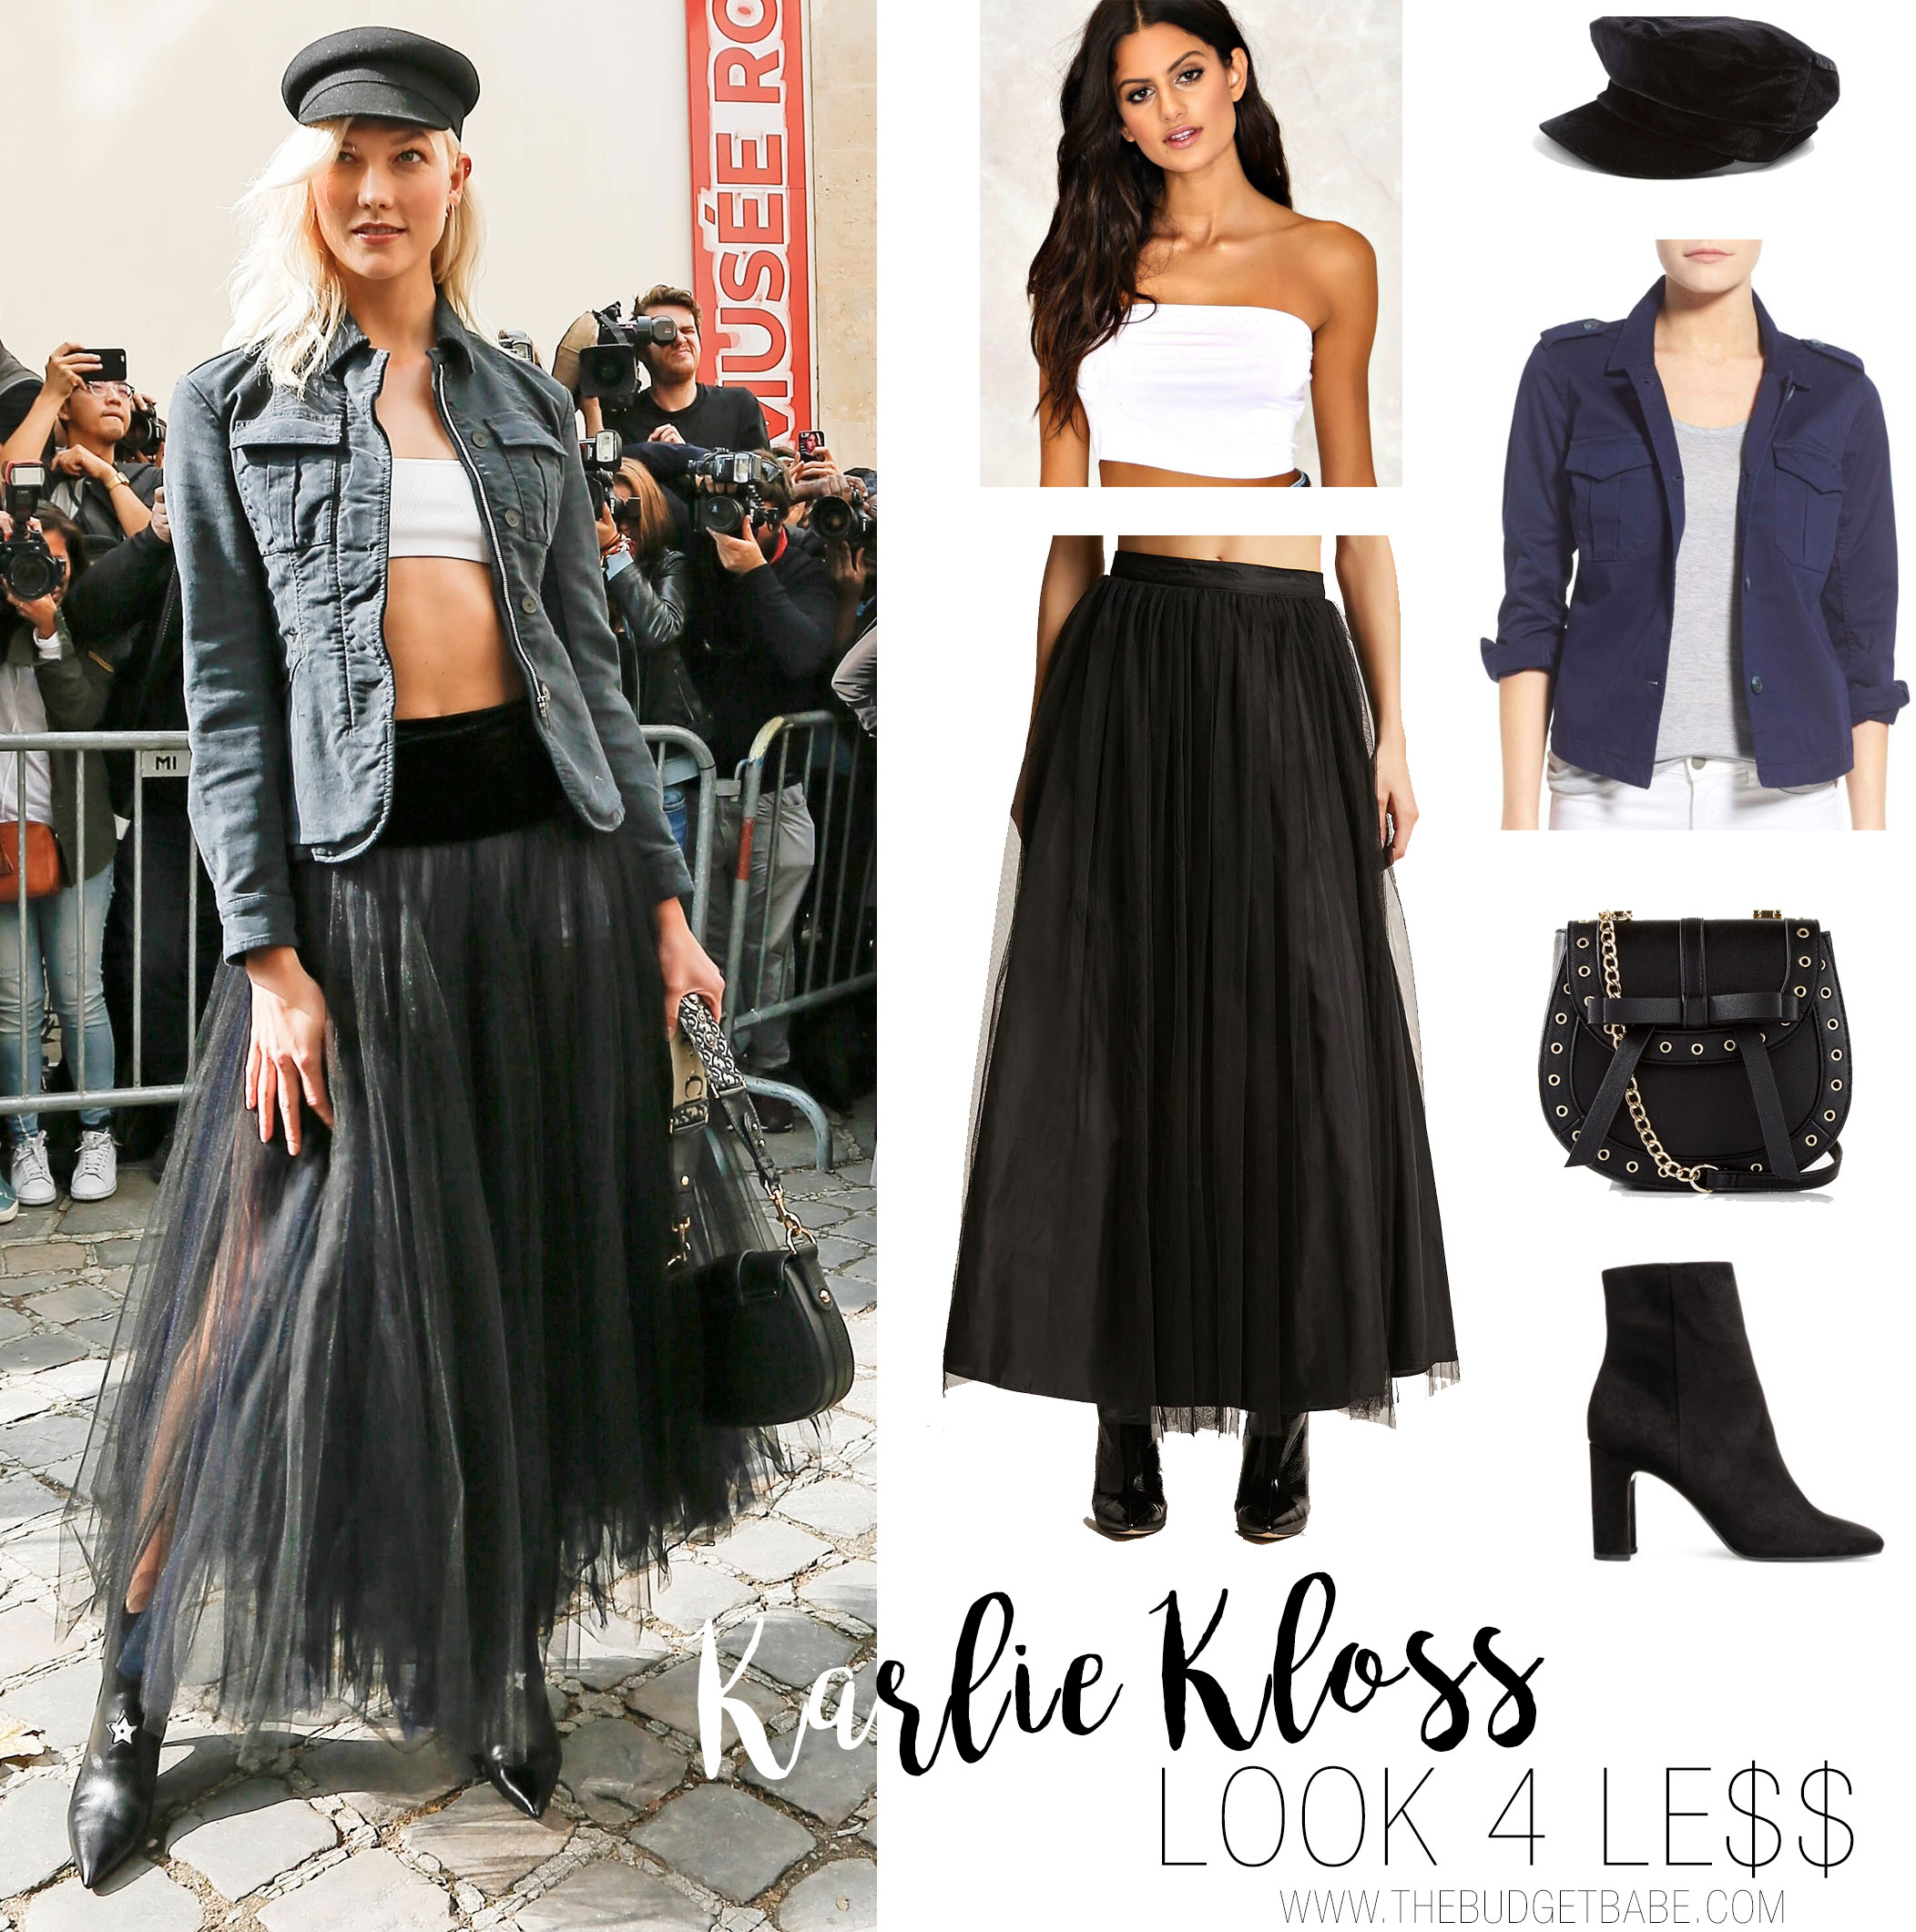 Karlie Kloss arrives at the Dior Paris fashion week show in a tulle skirt and zipper jacket.